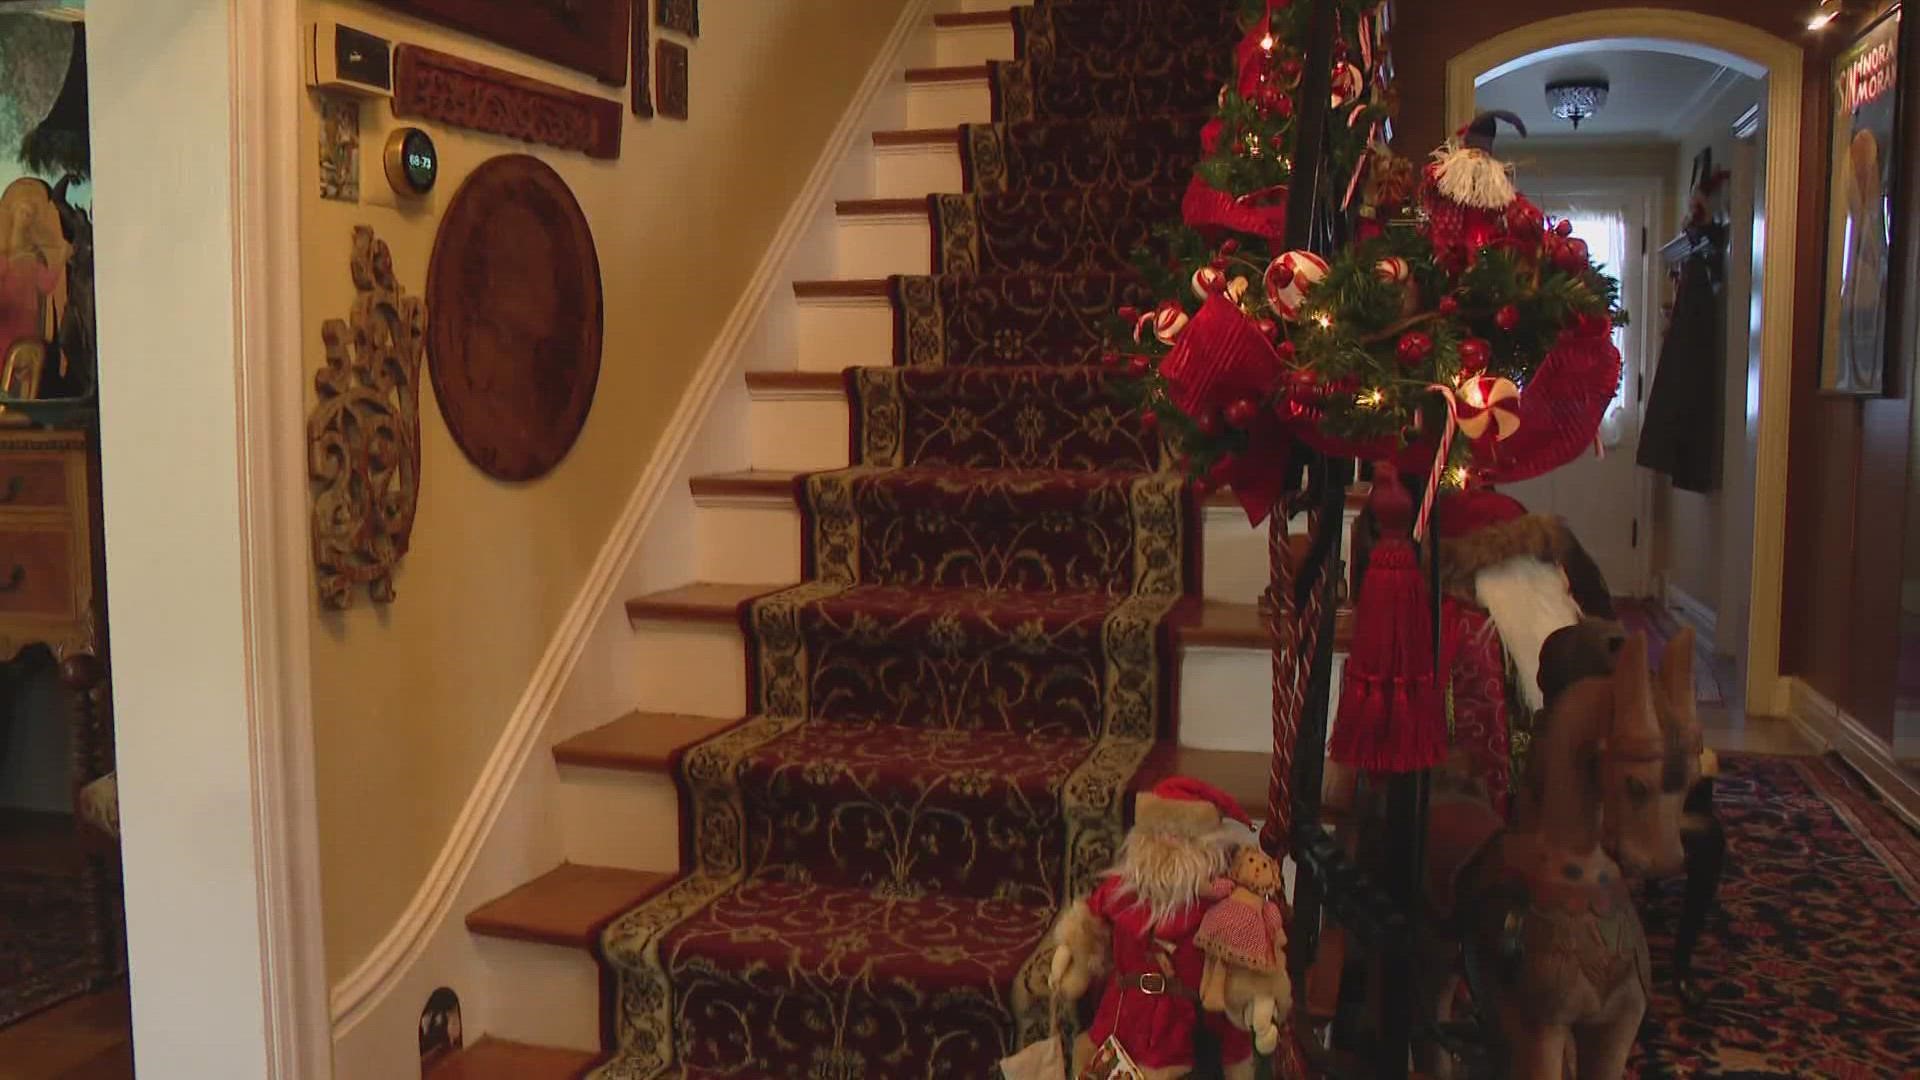 The annual Midtown Holiday Home Tour is being put on this weekend by Ivy Tech.